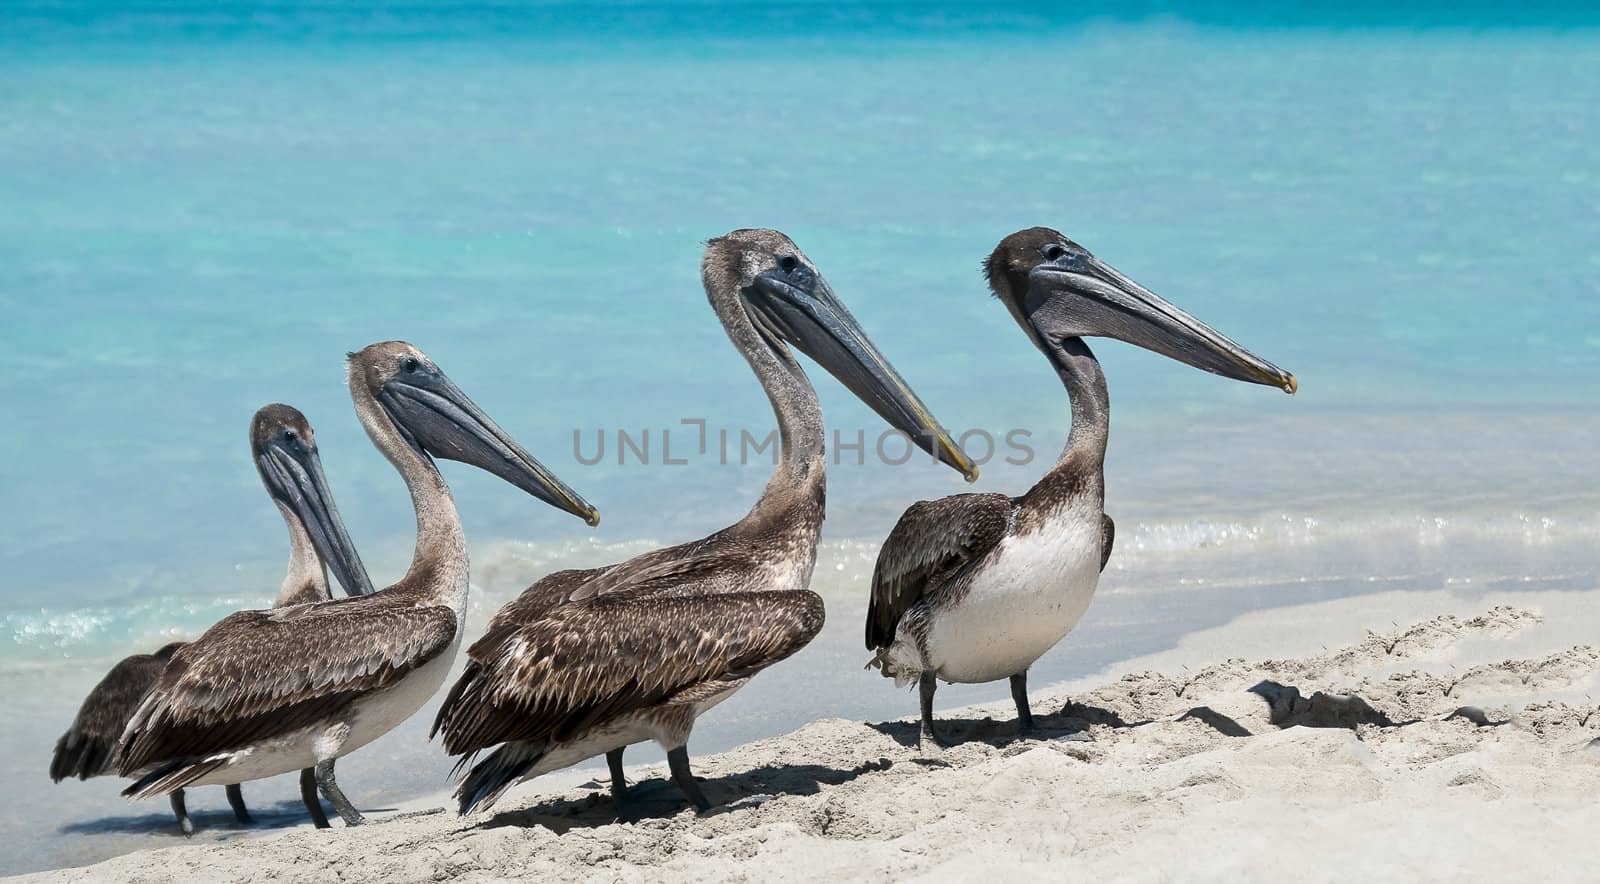 A quartet of pelicans during rush hour on the beach.
